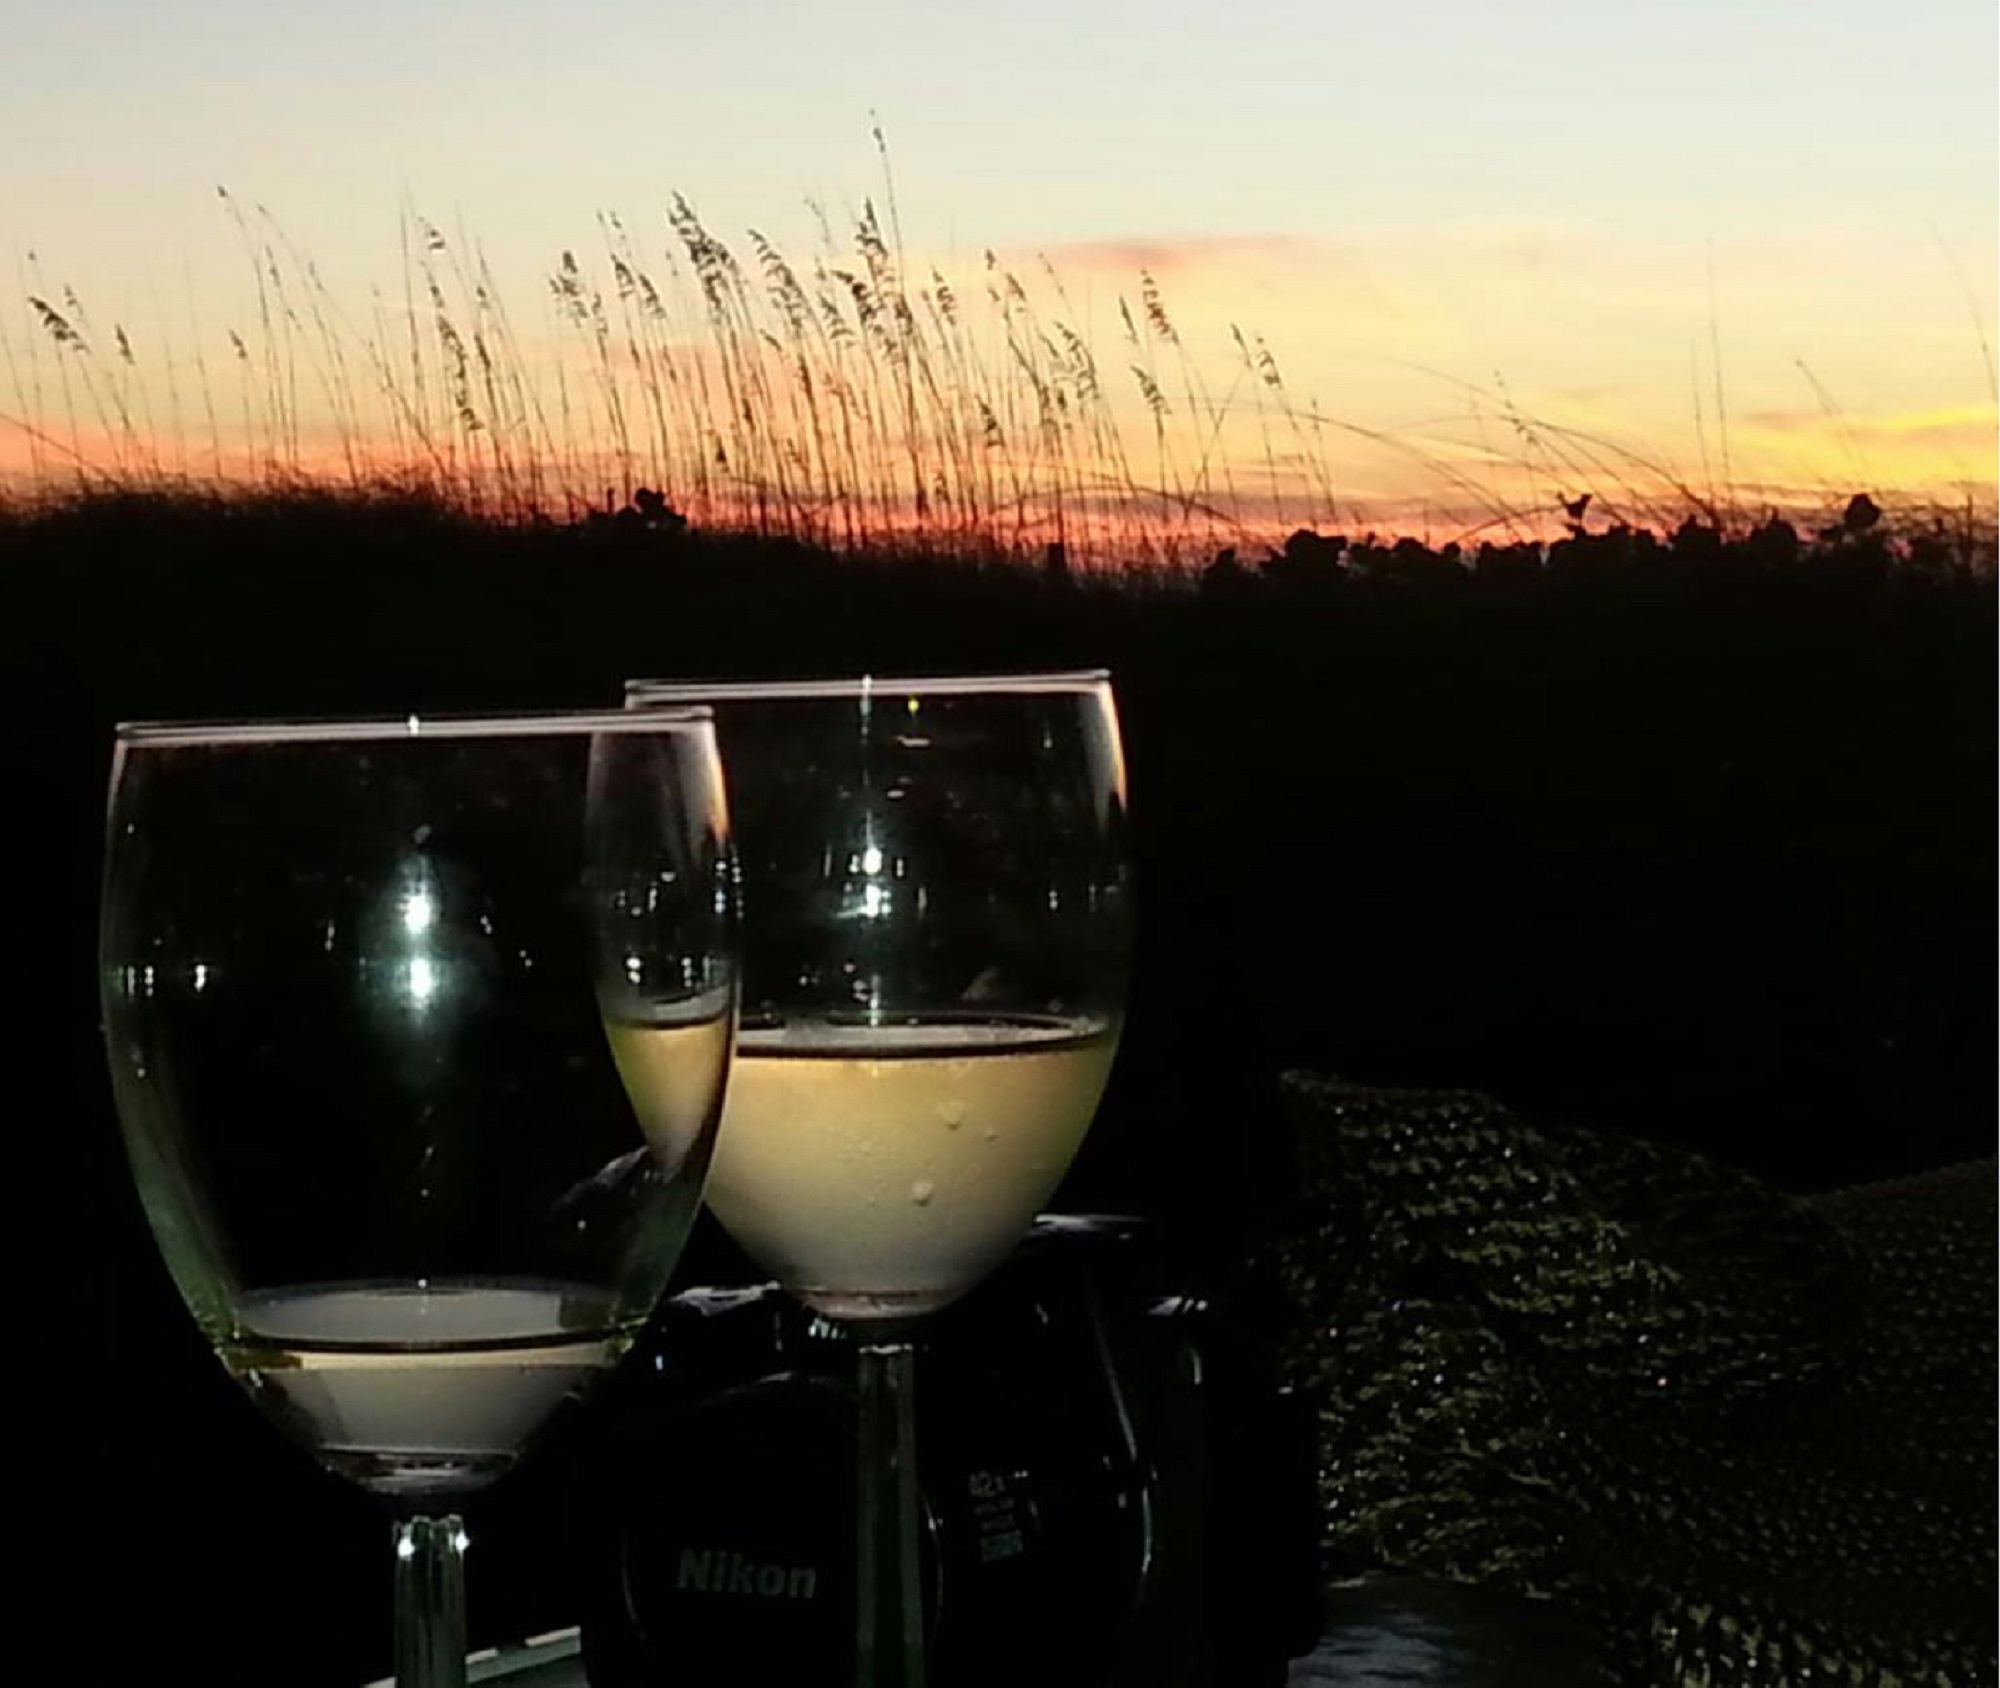 Sunset with Wine